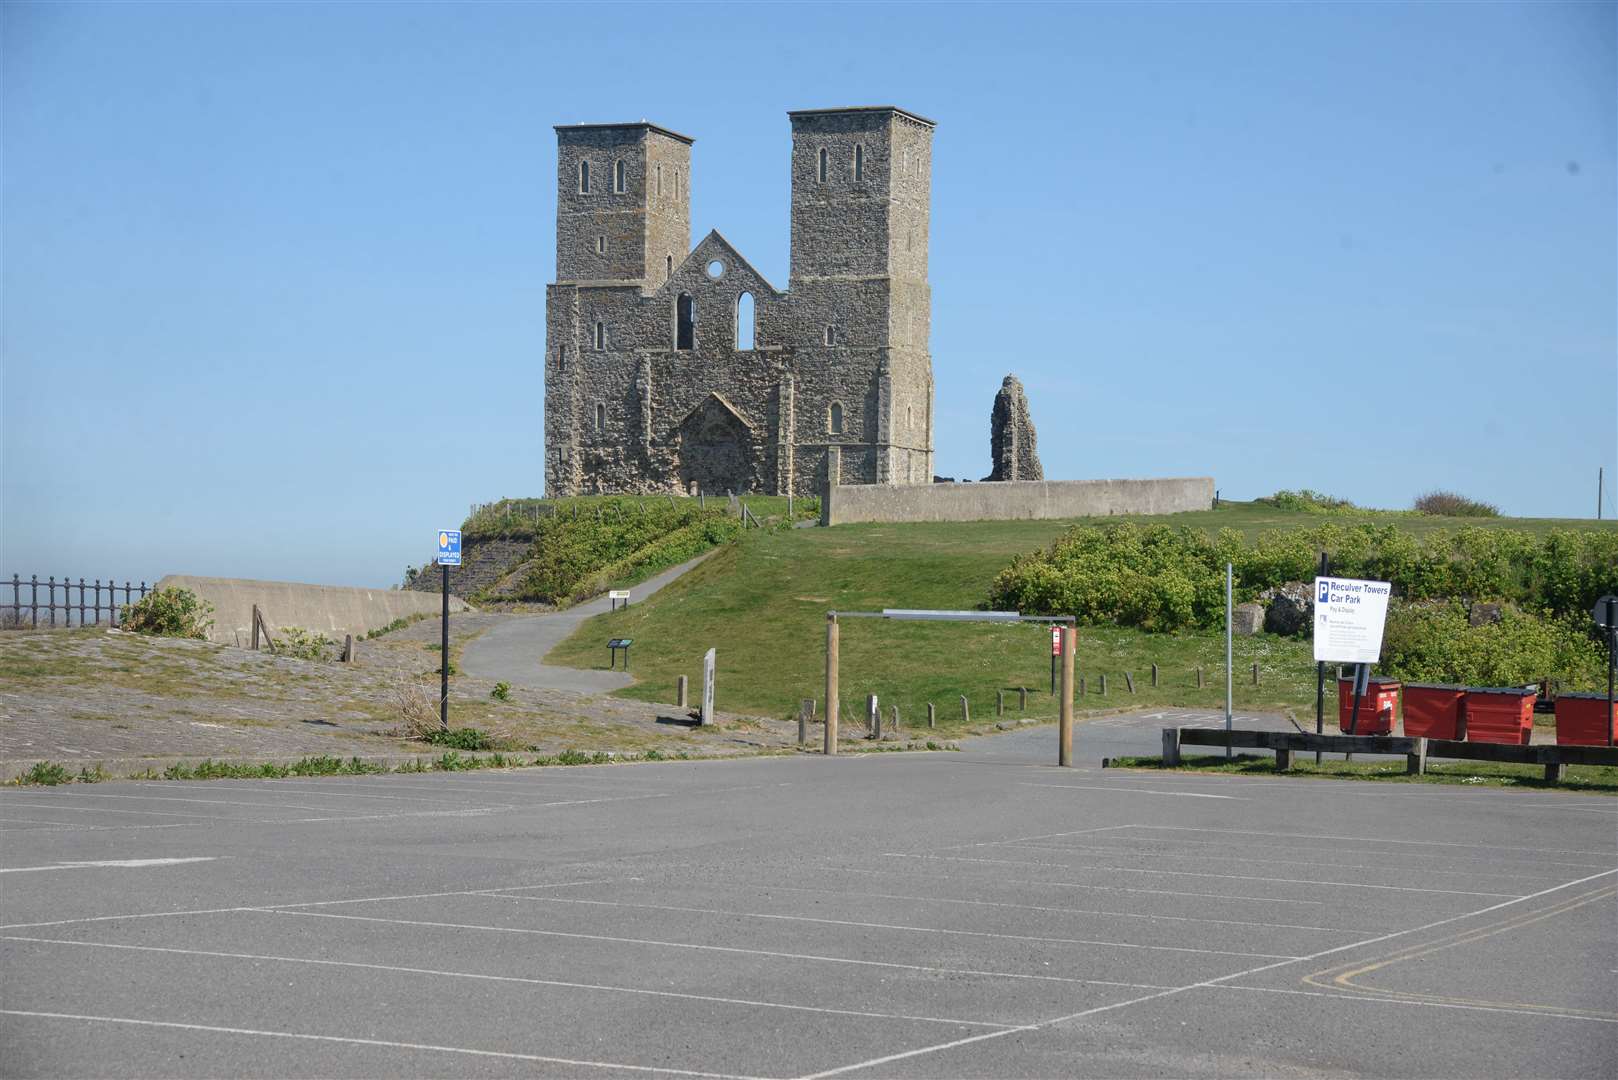 Reculver Towers, near Herne Bay, has been targeted by racist vandals who carved a swastika and highly offensive words into a much-loved coastal landmark. Picture: Chris Davey